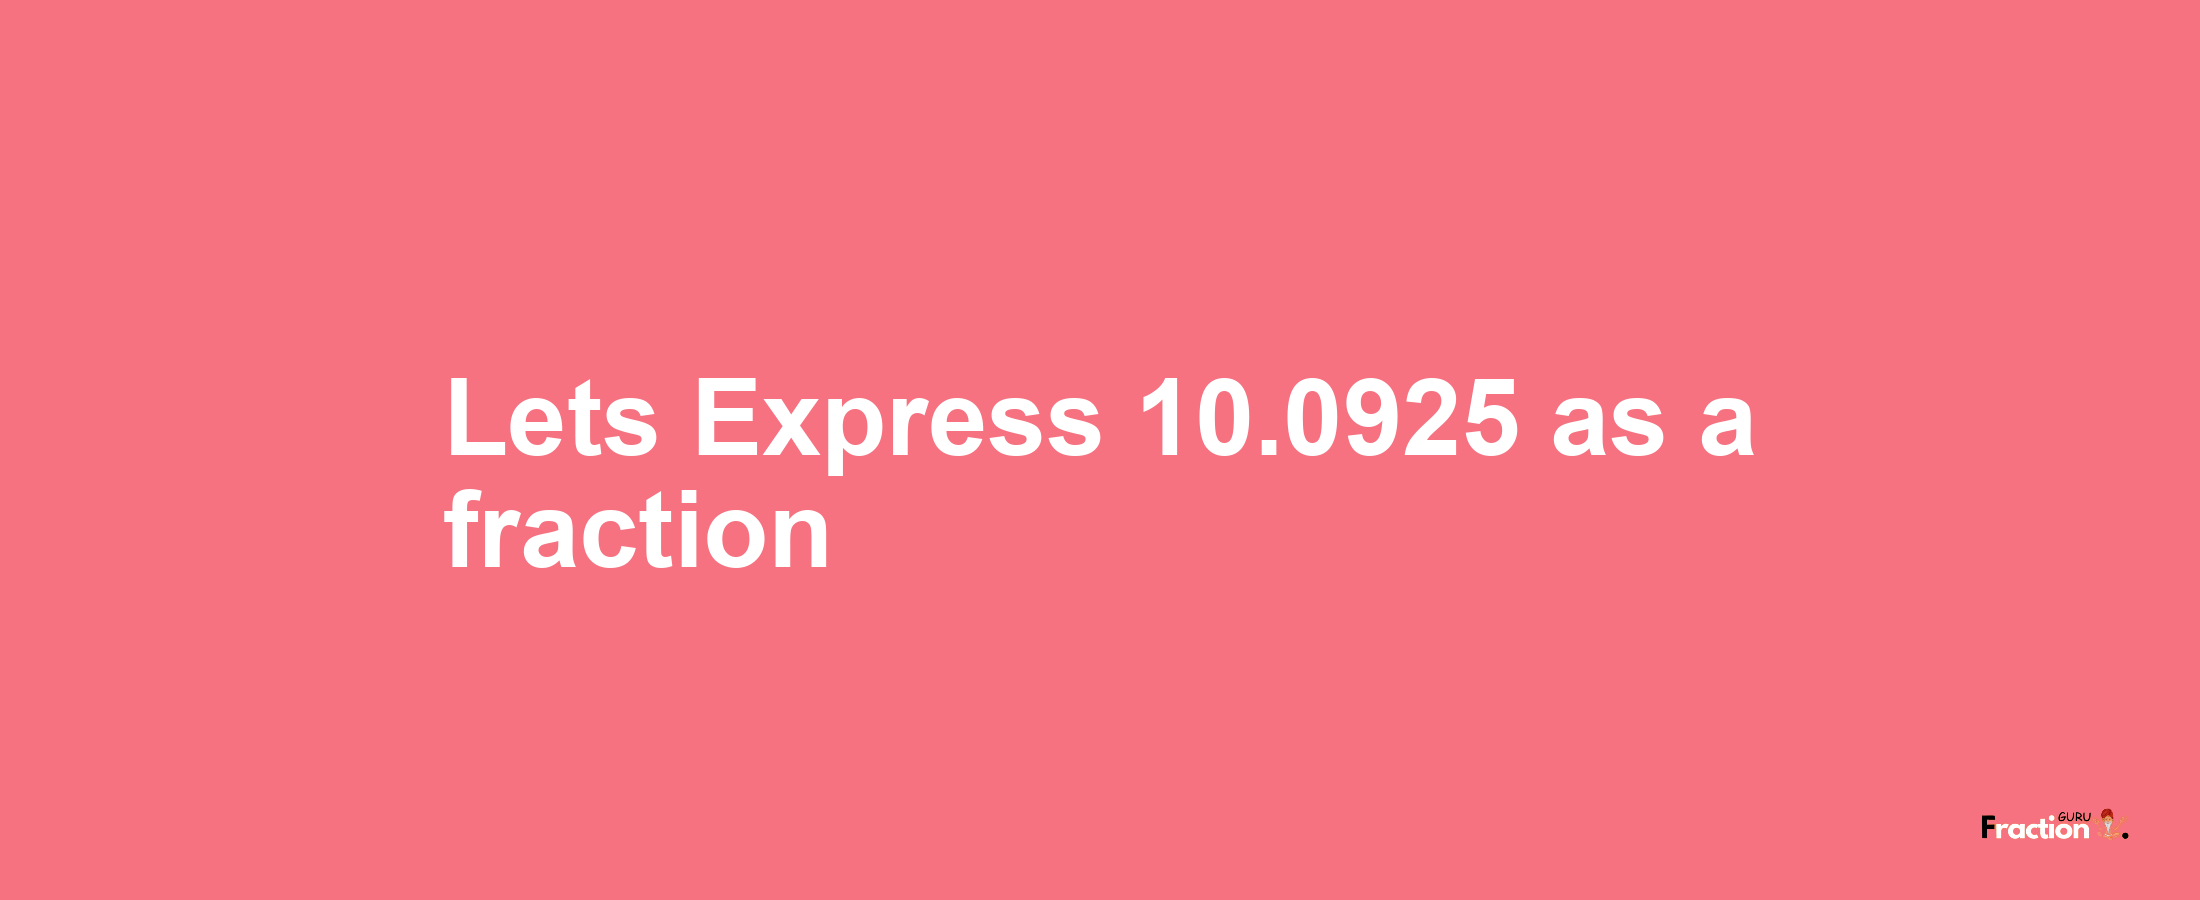 Lets Express 10.0925 as afraction